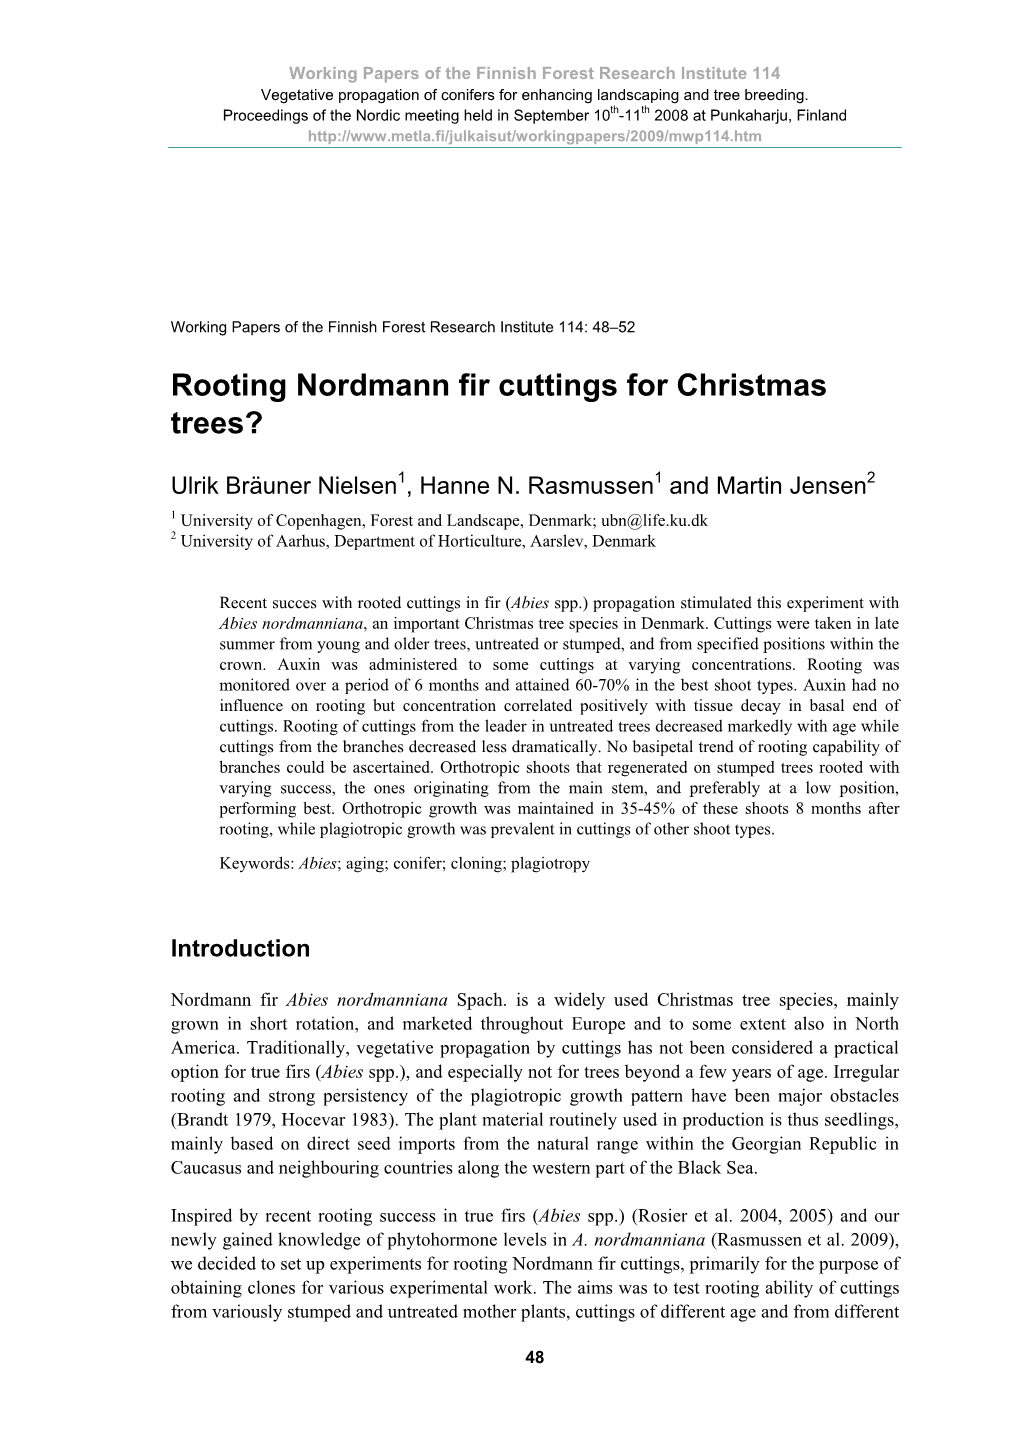 Rooting Nordmann Fir Cuttings for Christmas Trees?